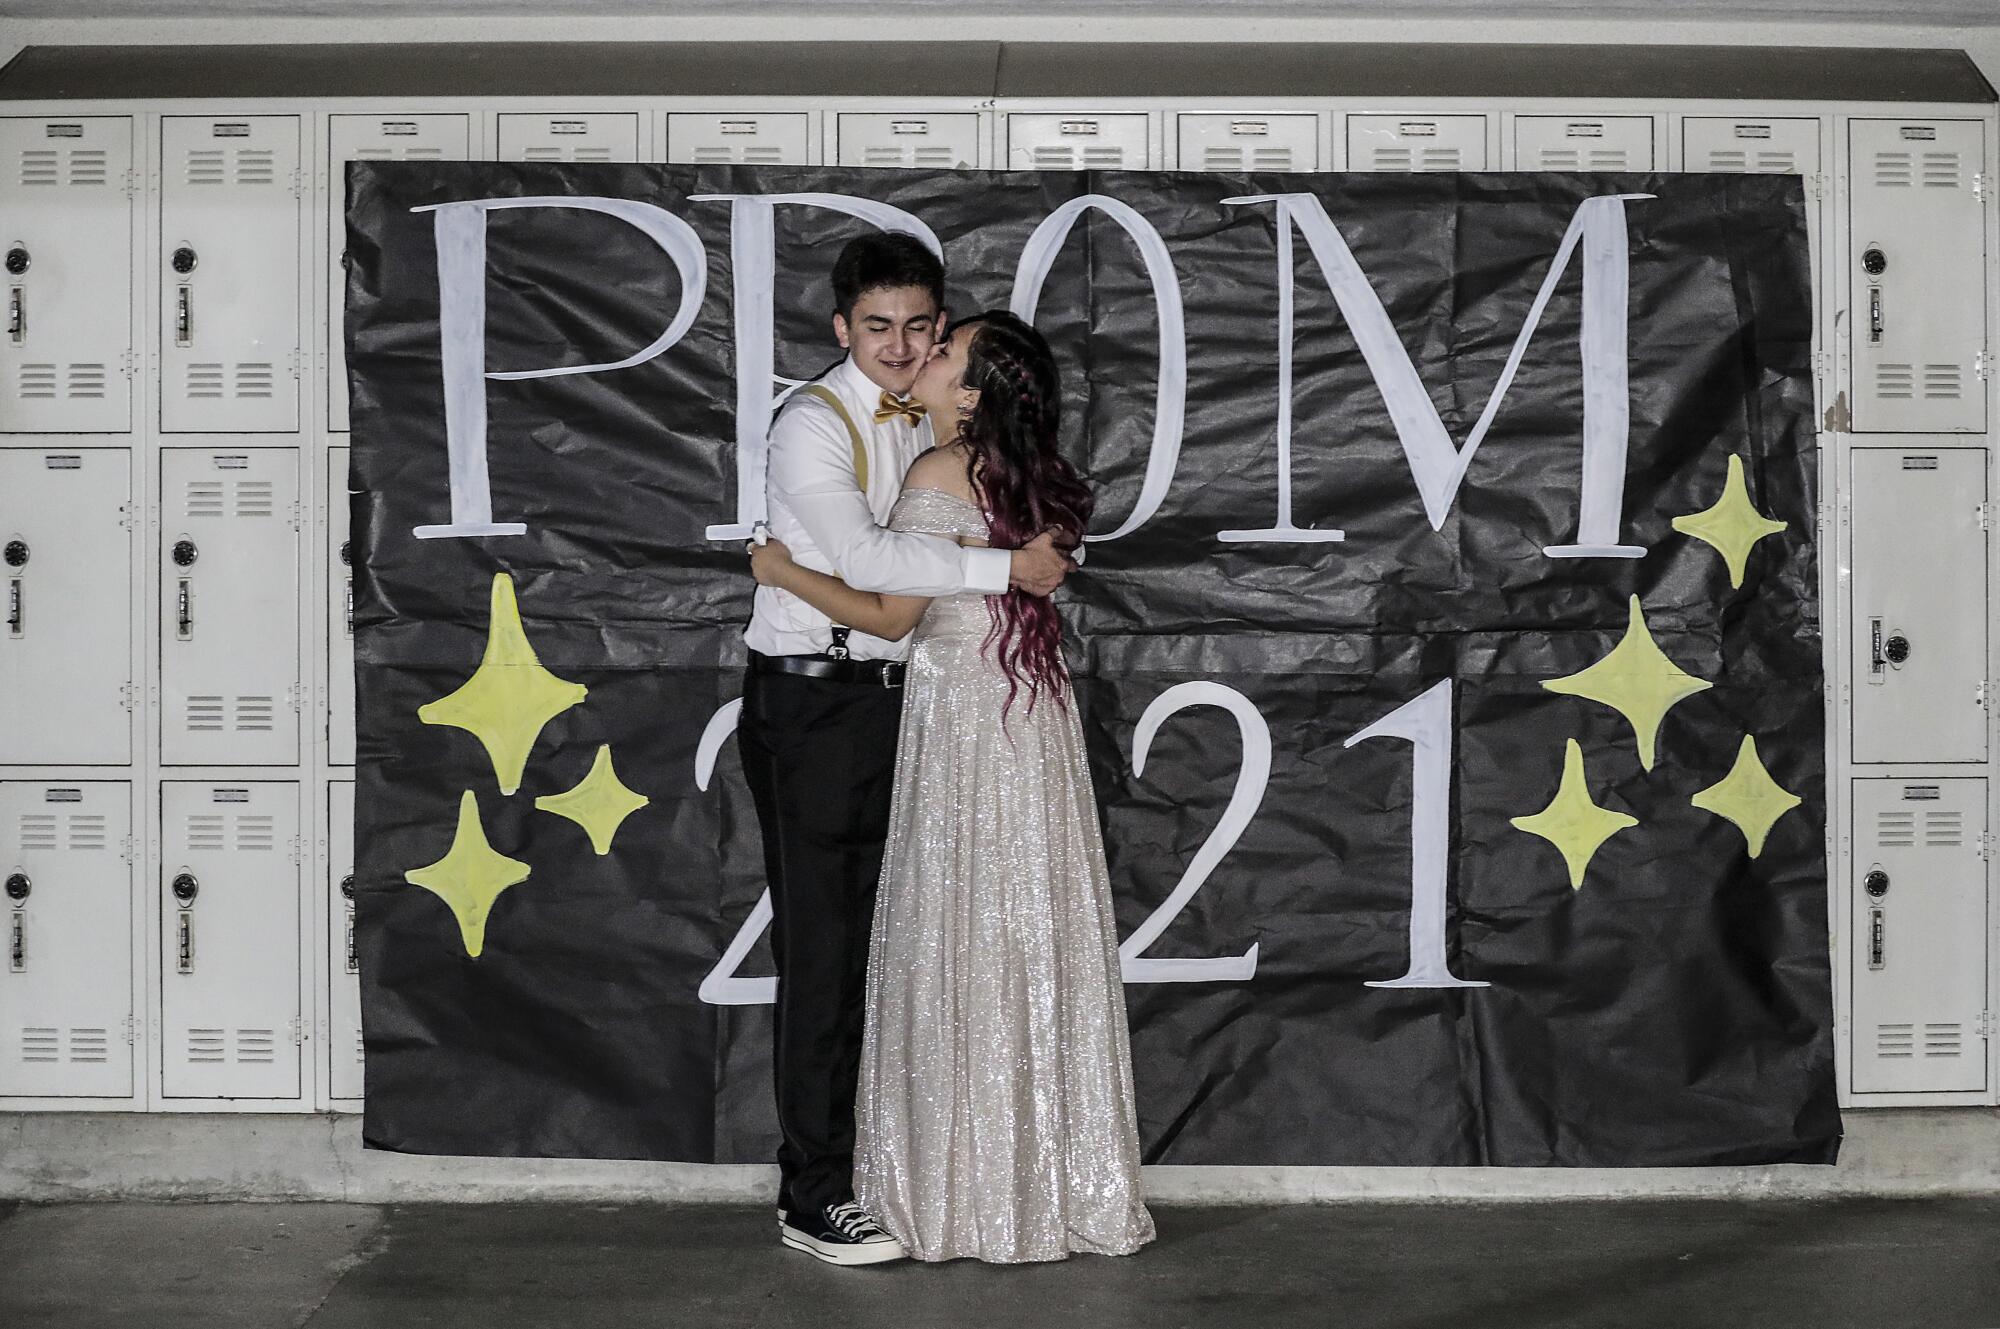 High school sweethearts embrace in front of lockers at their on-campus prom. 